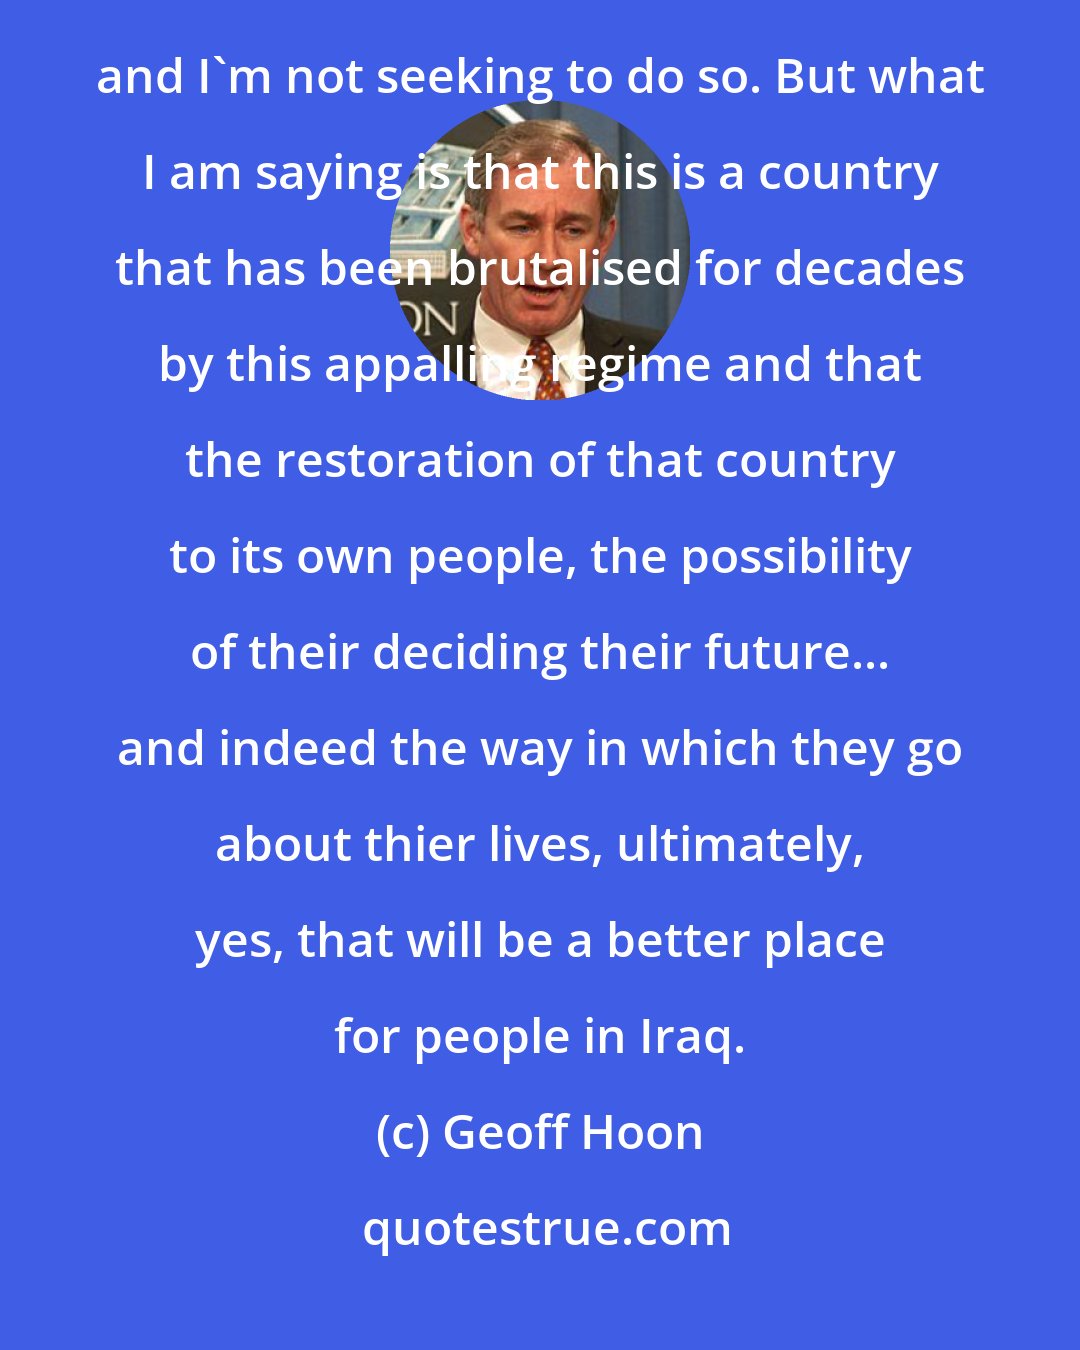 Geoff Hoon: One day they might. I accept that in the short term the consequences are terrible. No one minimises those and I'm not seeking to do so. But what I am saying is that this is a country that has been brutalised for decades by this appalling regime and that the restoration of that country to its own people, the possibility of their deciding their future... and indeed the way in which they go about thier lives, ultimately, yes, that will be a better place for people in Iraq.